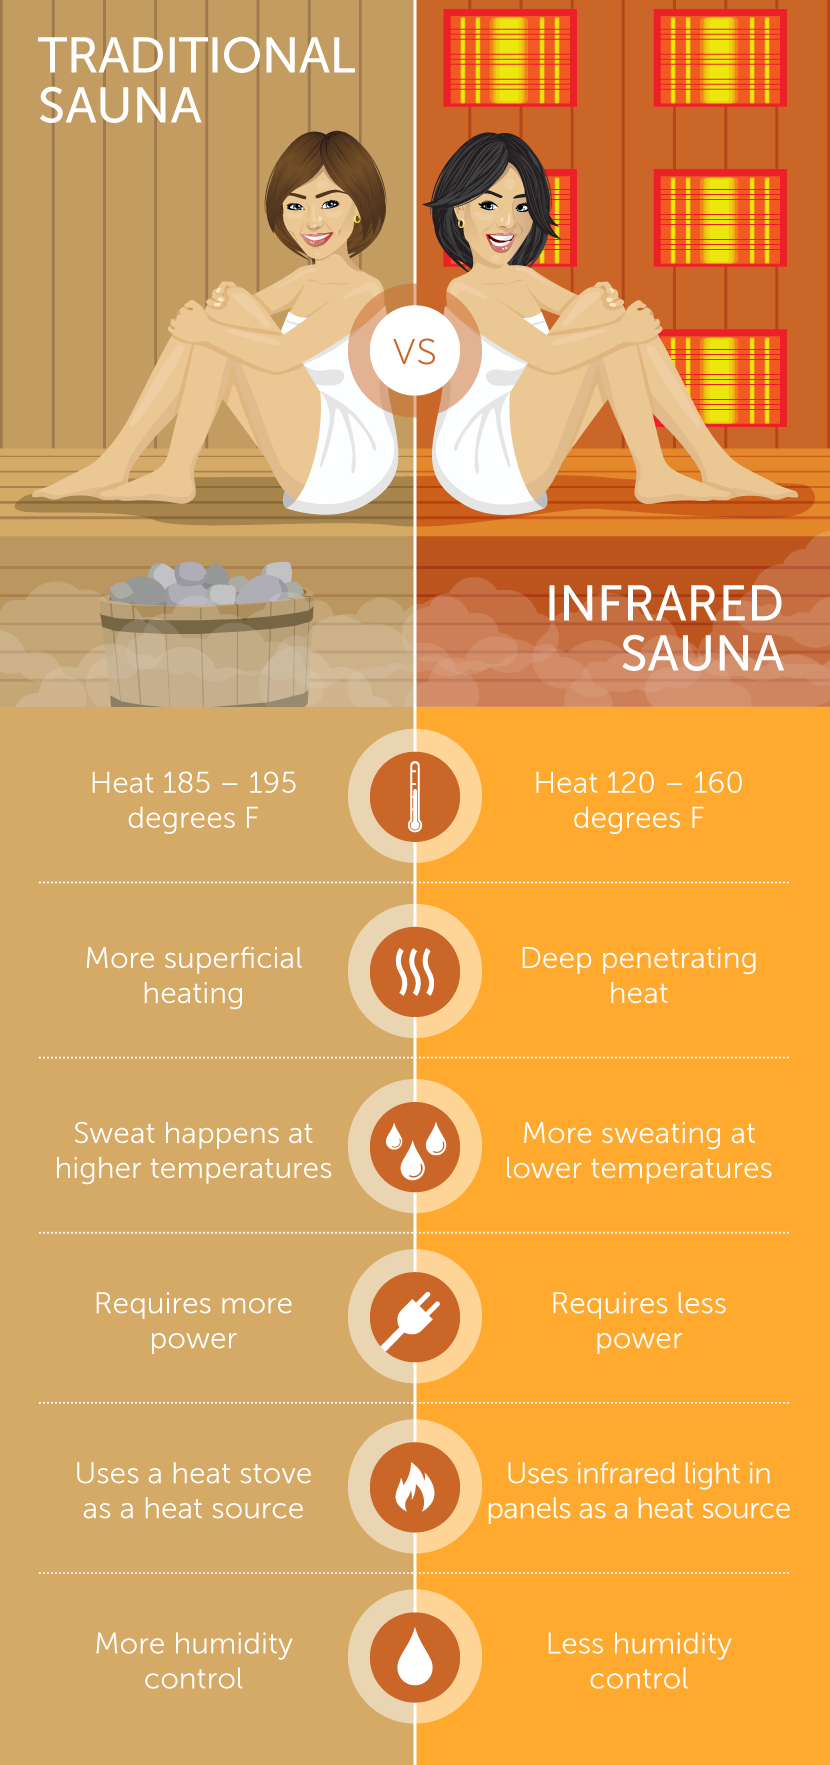 Is Infrared Sauna Good for Skin?